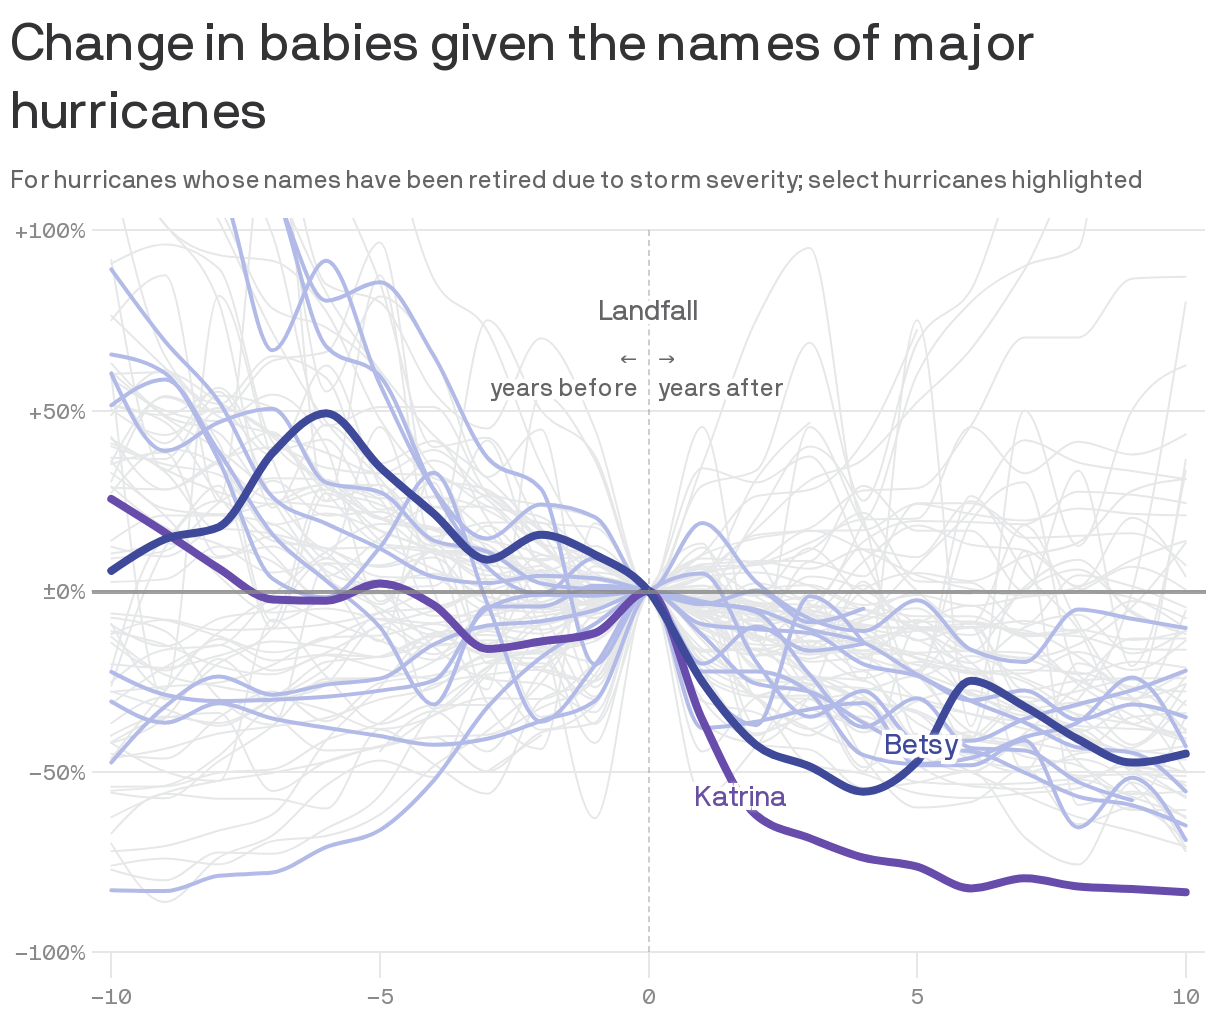 Change in babies given the names of major hurricanes